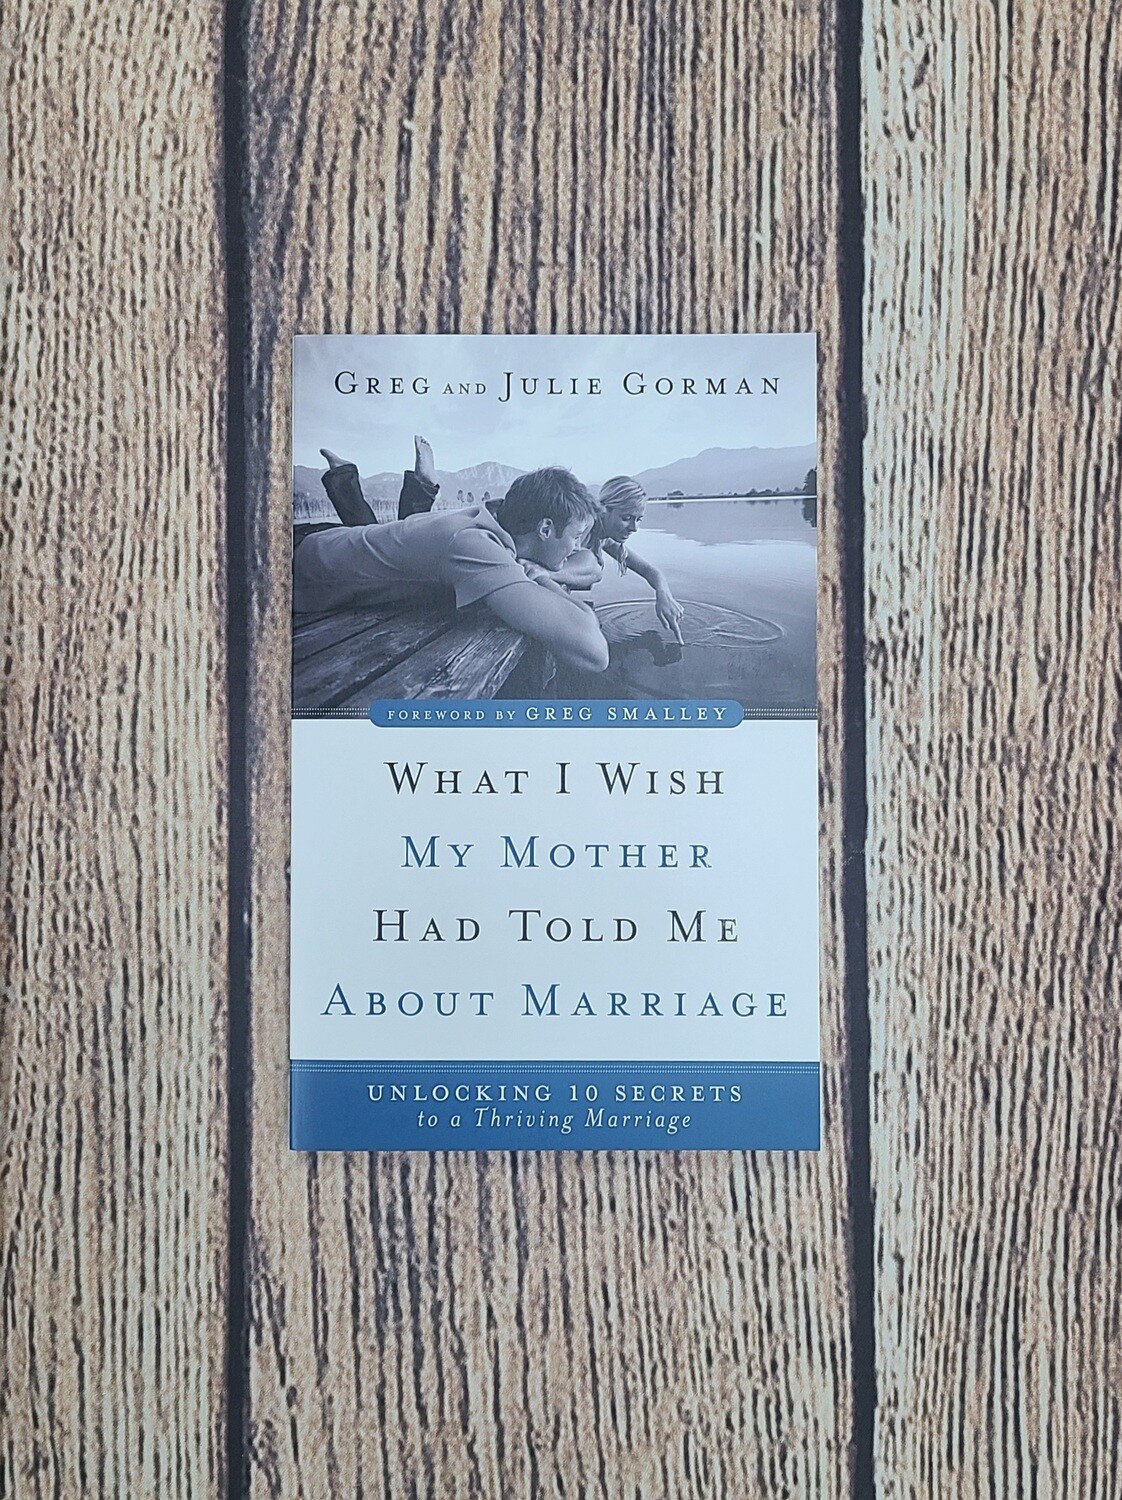 What I Wish My Mother Had Told Me About Marriage by Greg and Julie Gorman